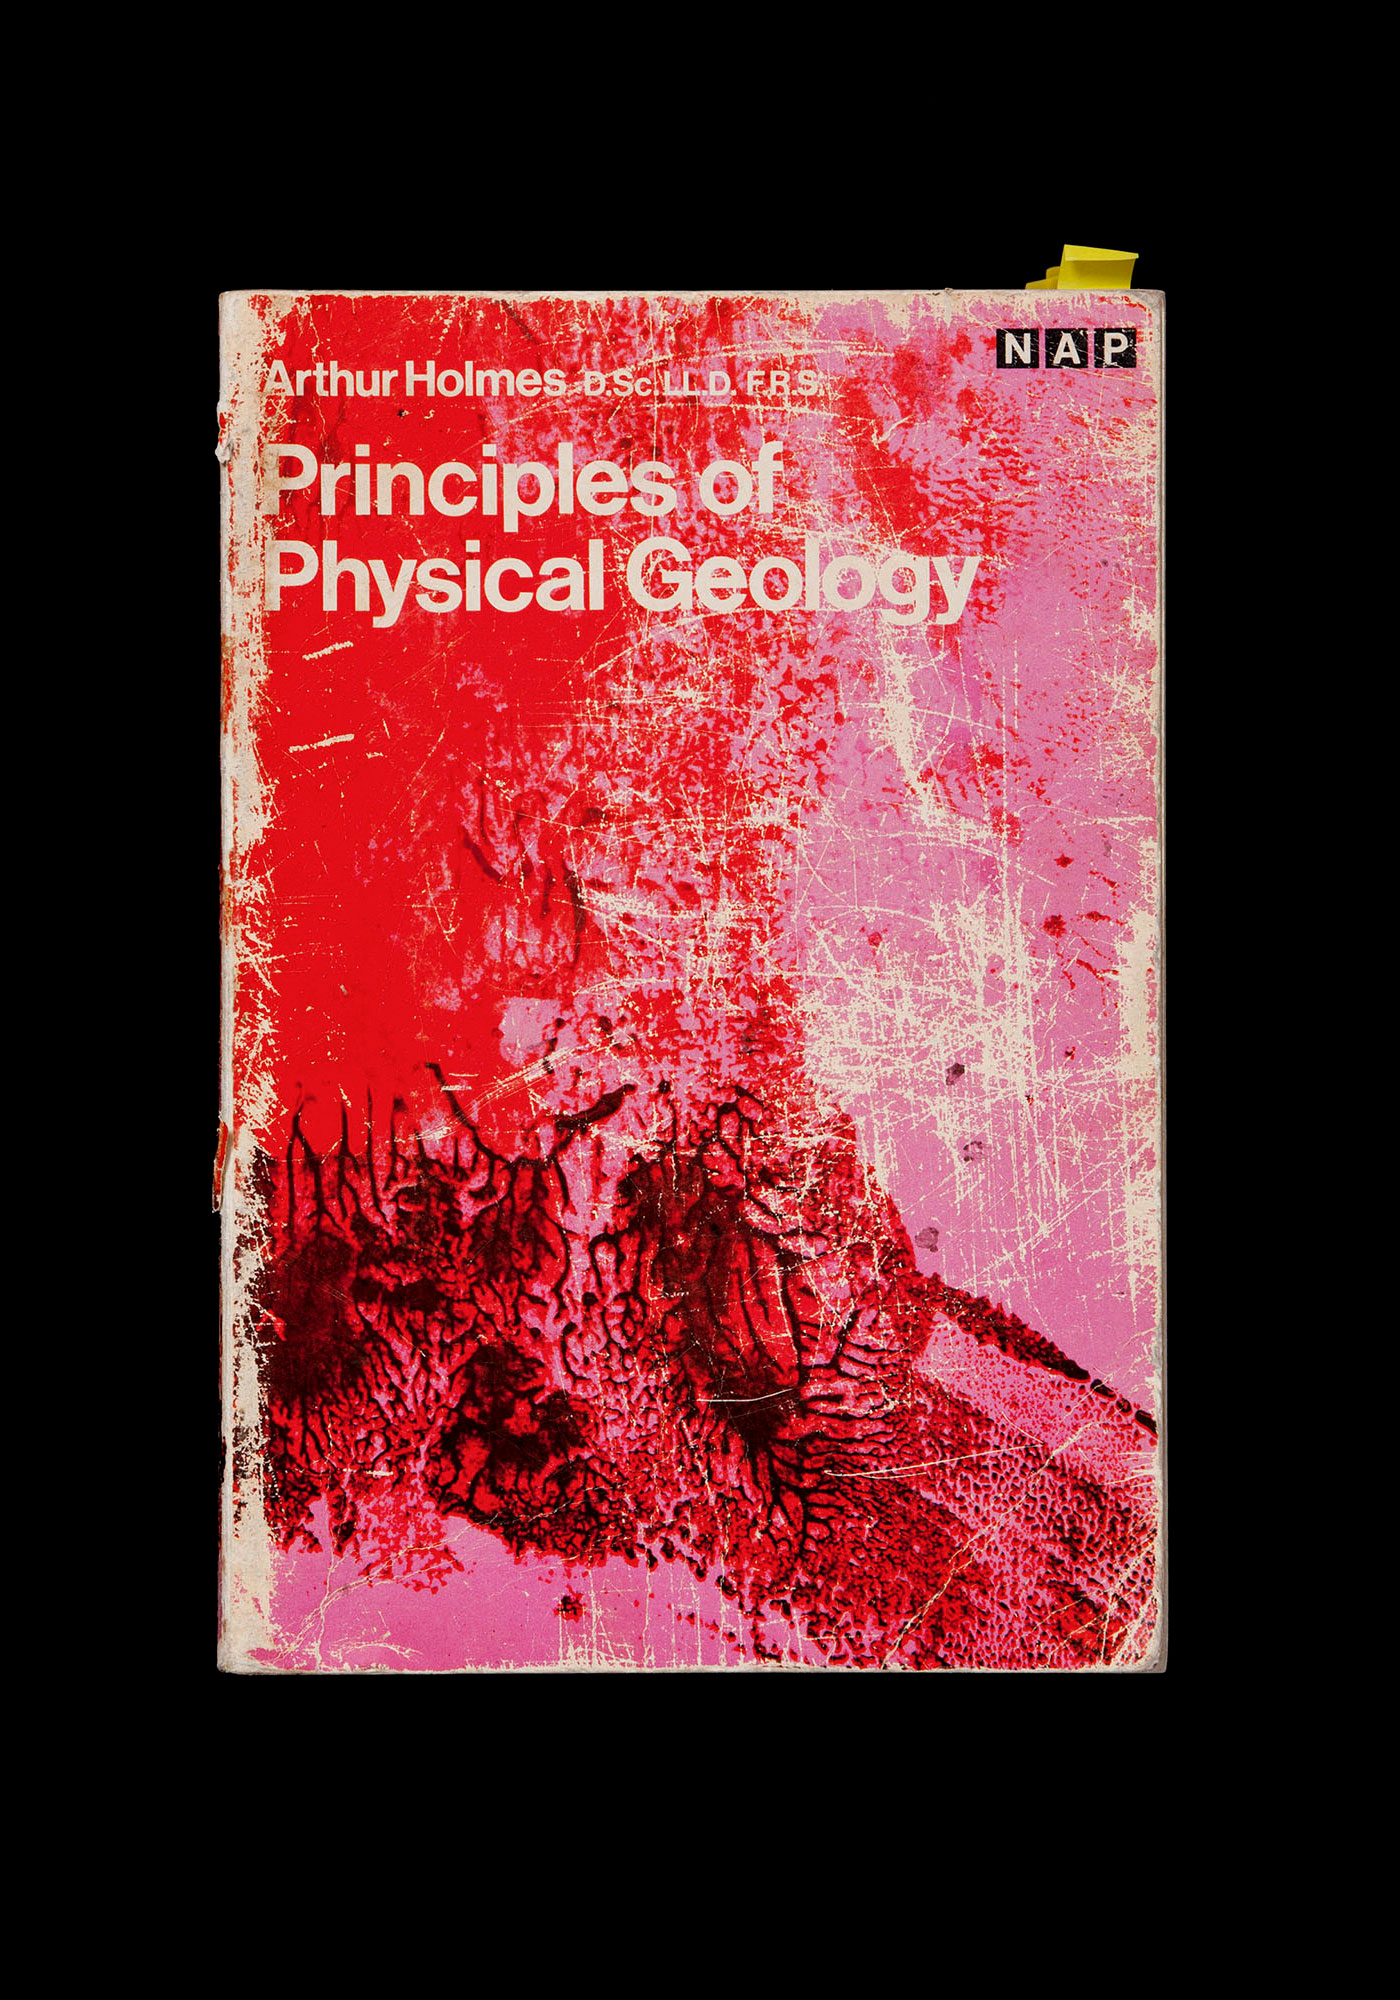 Front cover of Arthur Holmes, D.Sc.LL.D F.R.S, *Principles of Physical Geology*, second edition (Australia: Thomas Nelson and Sons, 1965). Gift to the artist from his grandfather. Photographer: Andrew Curtis.